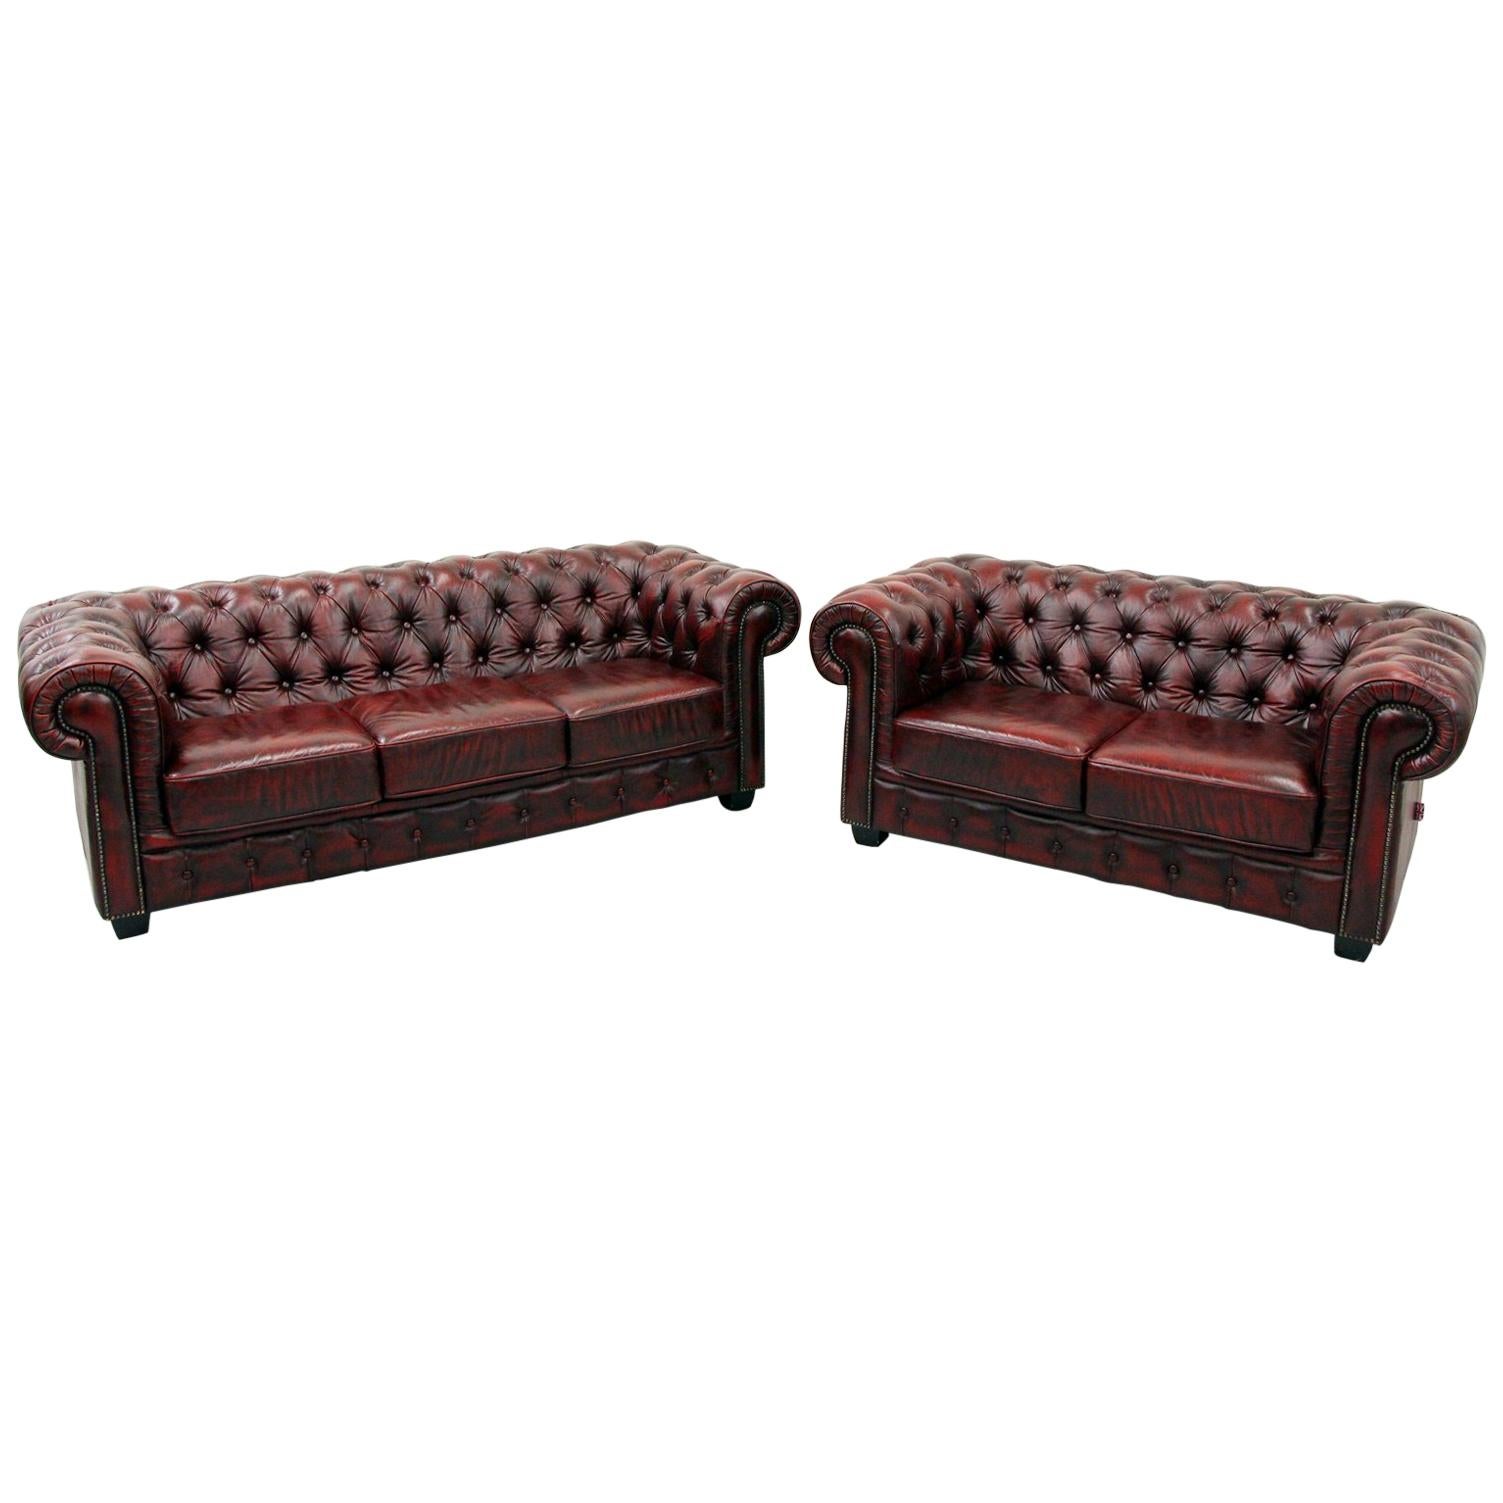 2 Chesterfield Sofa Leather Antique Vintage Couch English Chippendale For Sale